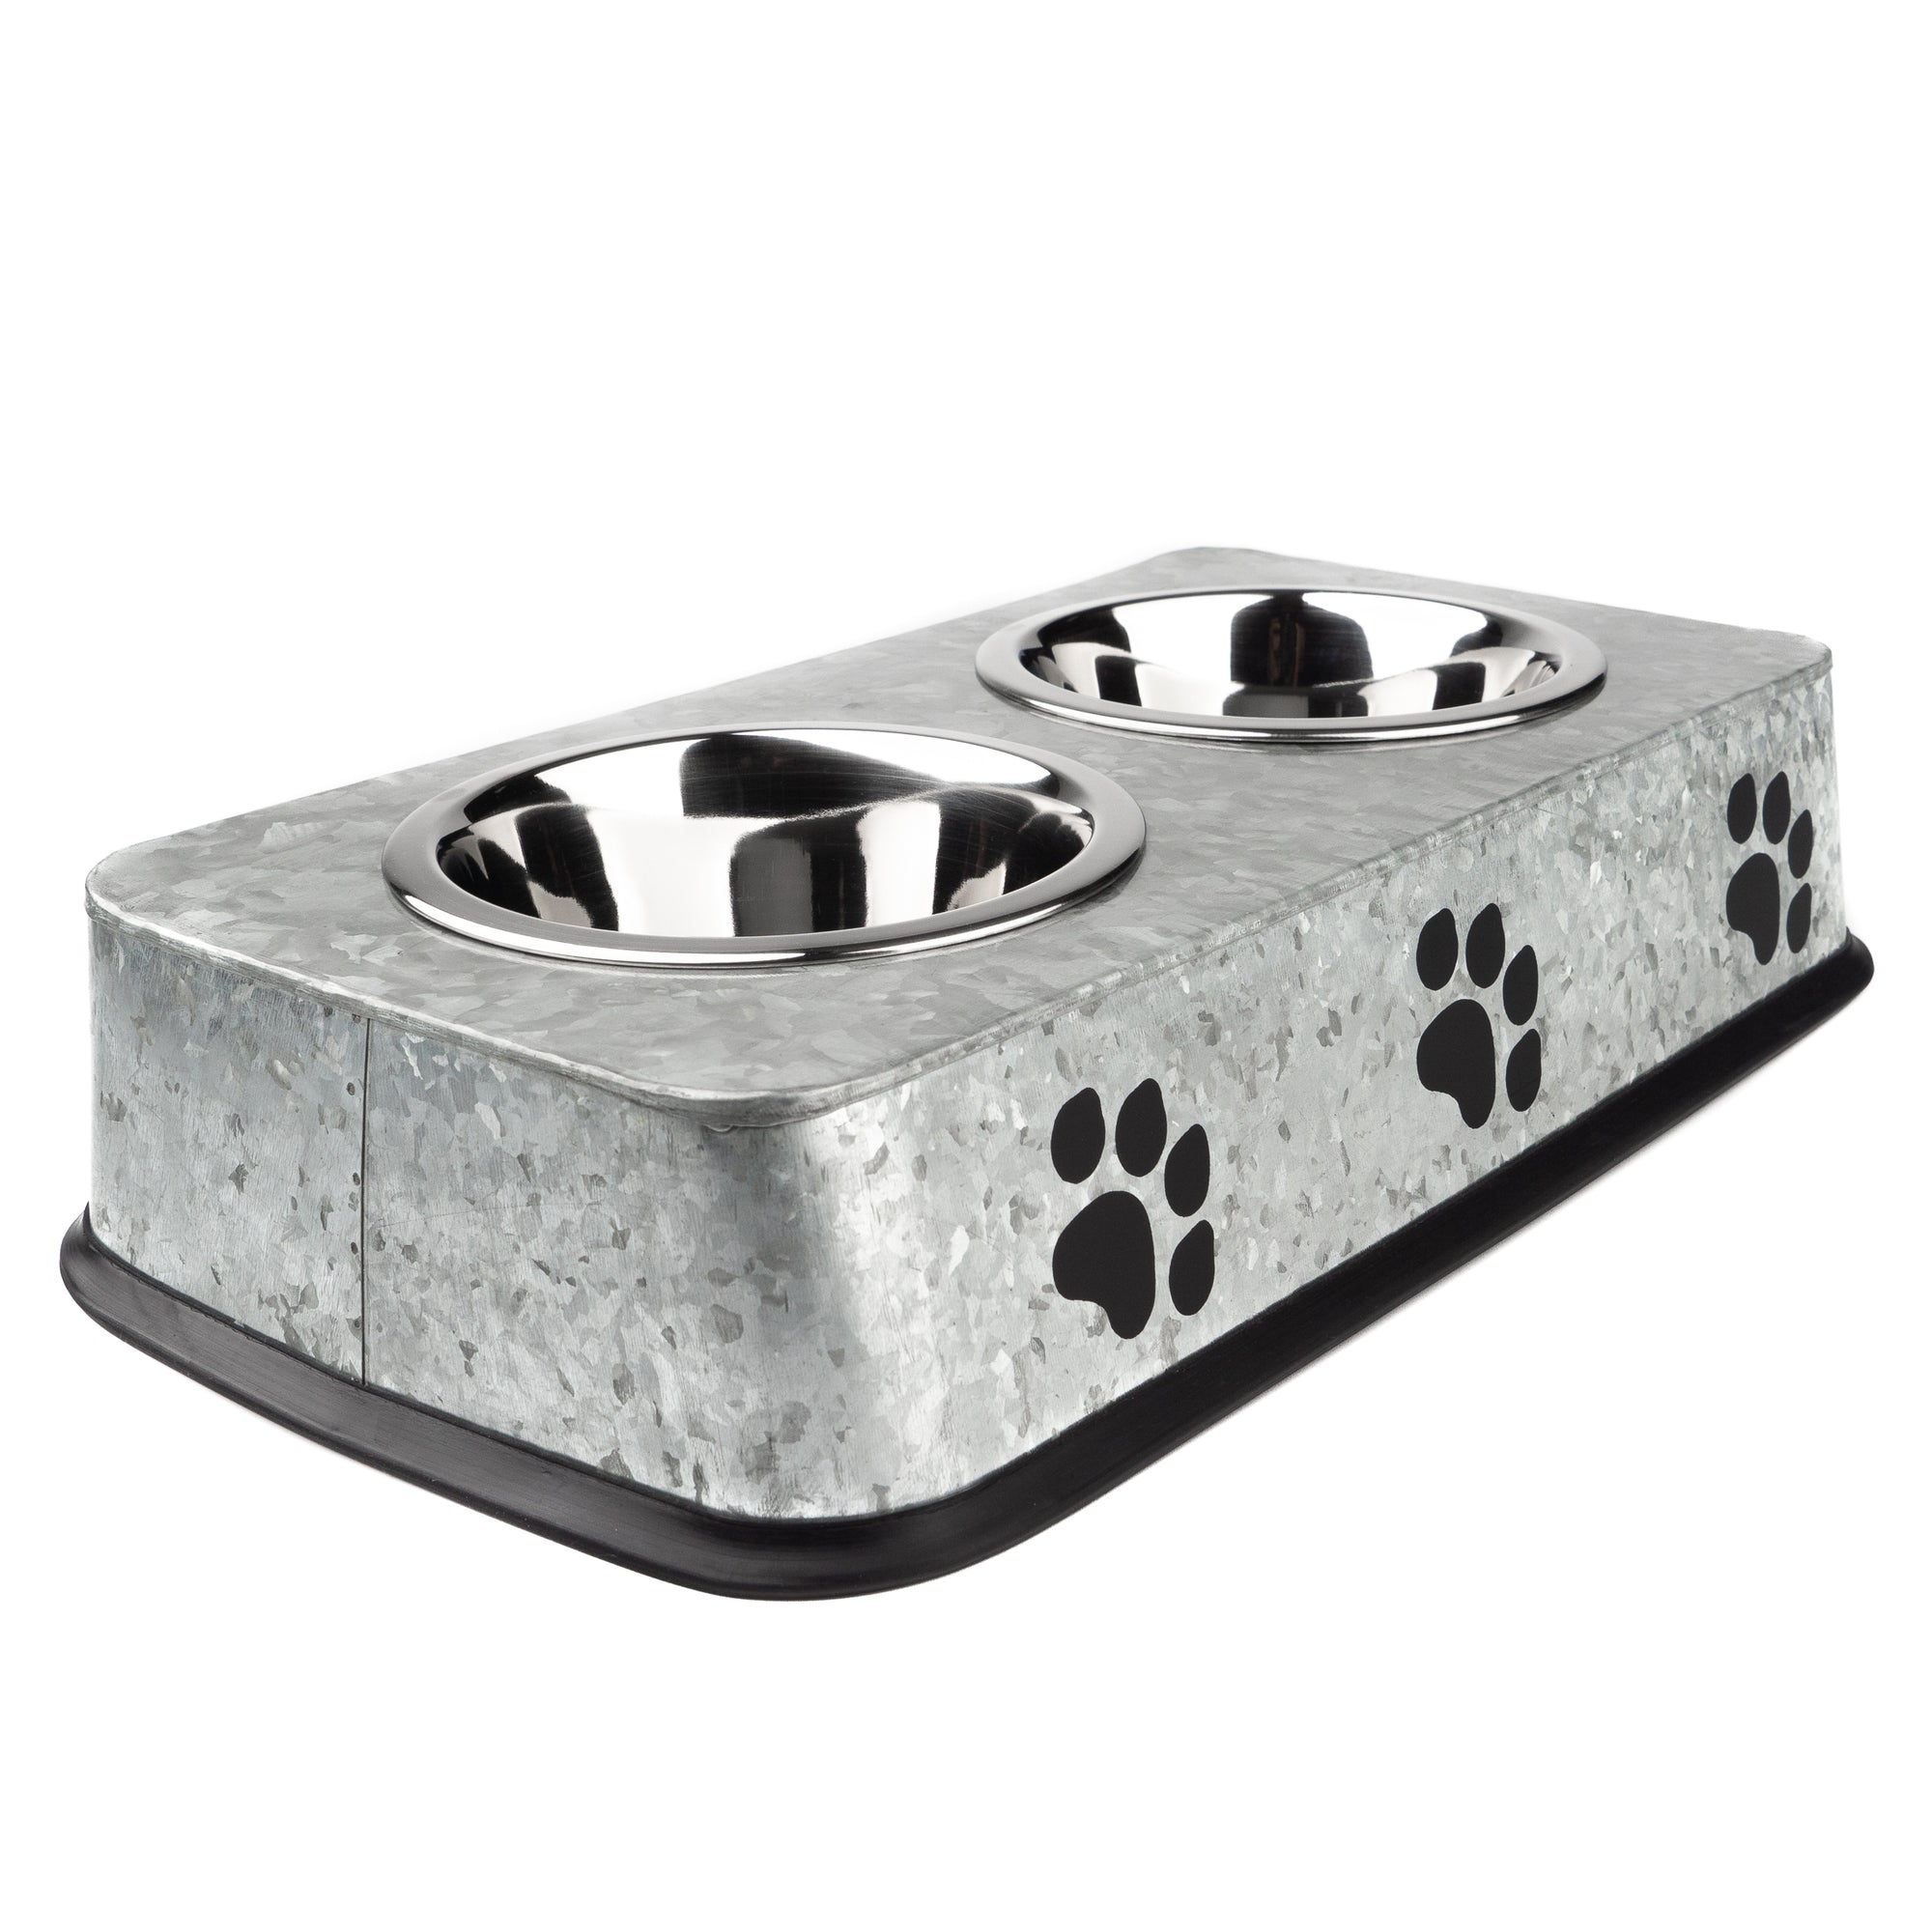 Double Bowl Dog/Cat Feeder with Stainless Steel Bowls & Stylish Paw Decals for Stylish Appeal | Bowls are Dishwasher Safe and Good for Feeding Water & Food | Perfect for a Medium to Large Sized Pets